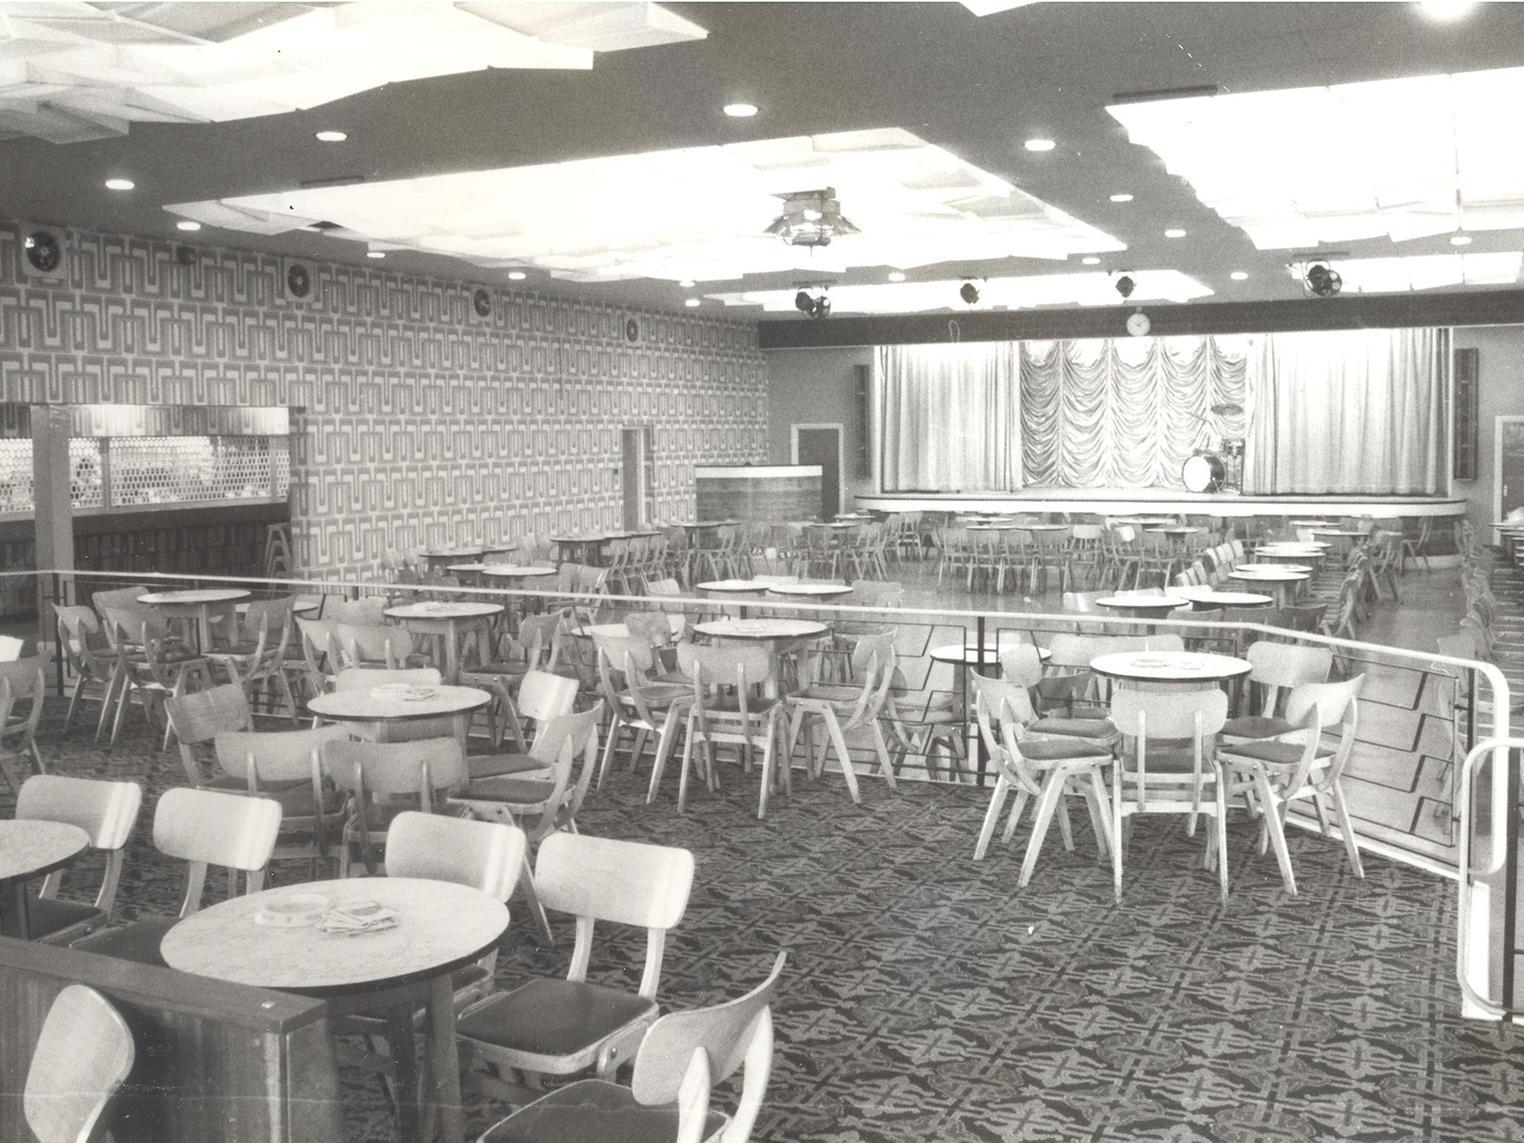 The concert room at the Middleton Social and Welfare Club which boasted seating for 700 people.